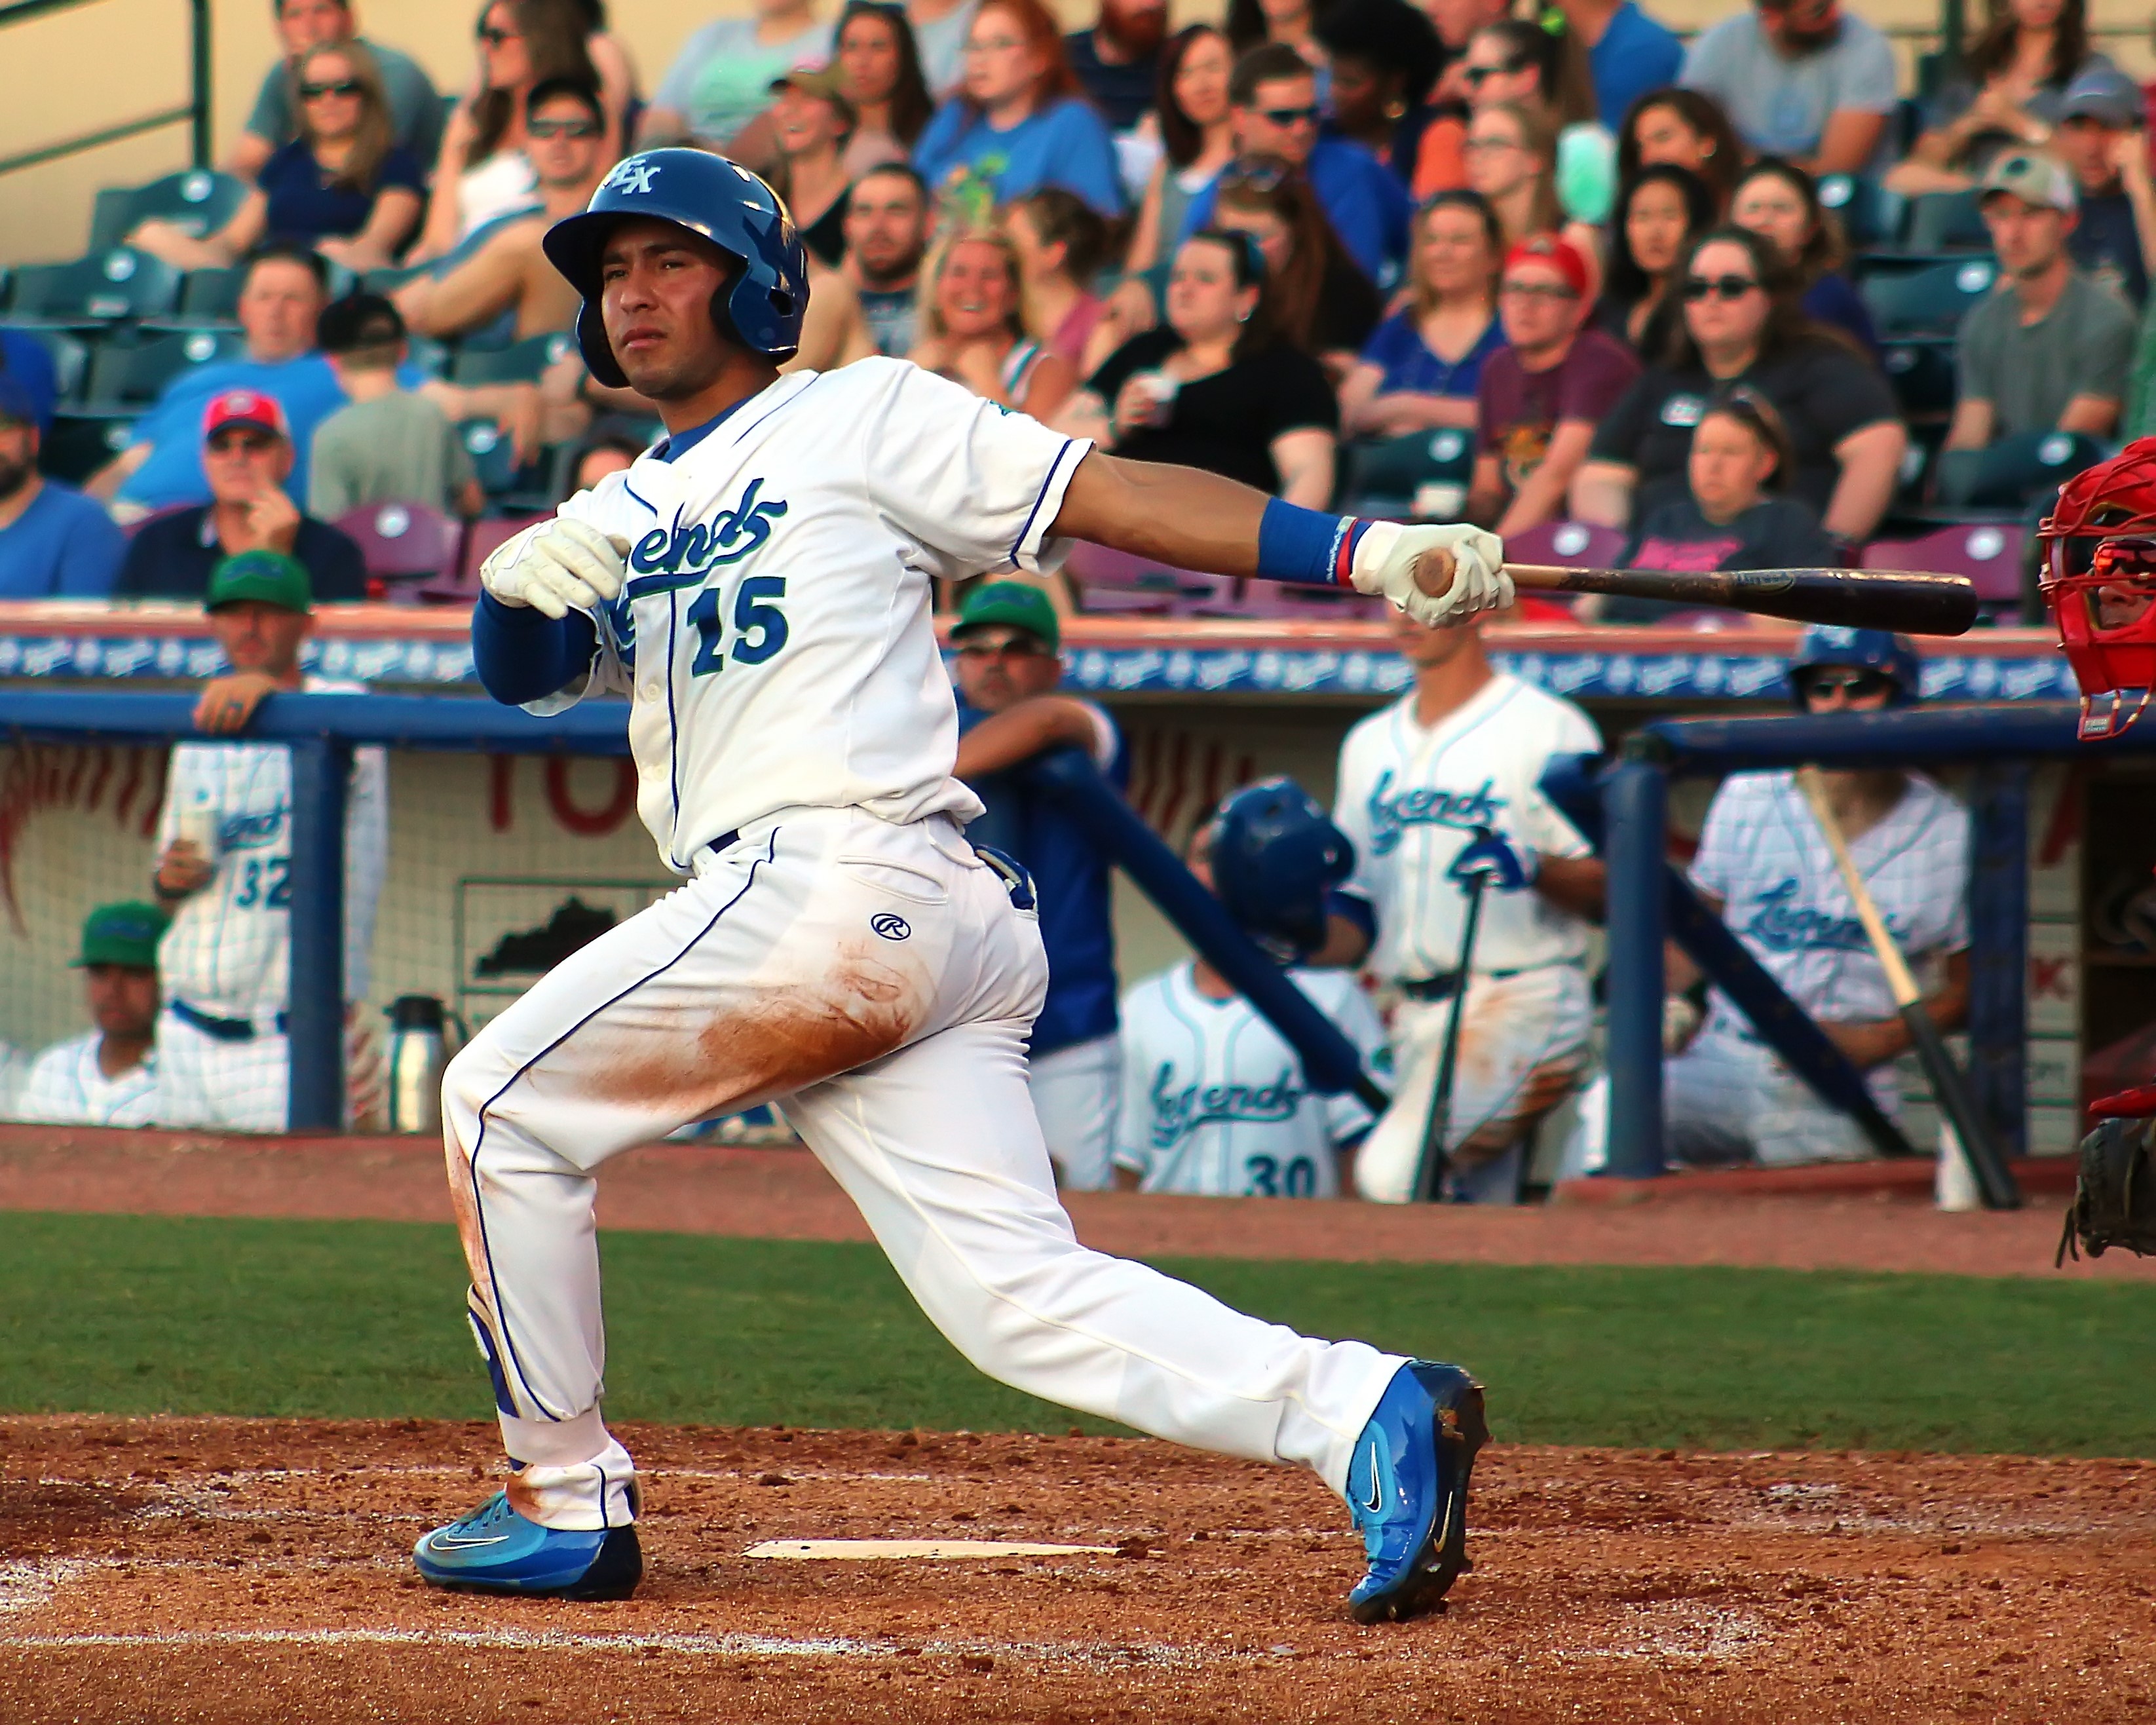 Cristian Perez, SS, Lexington Legends, Turns On a Pitch_filtered